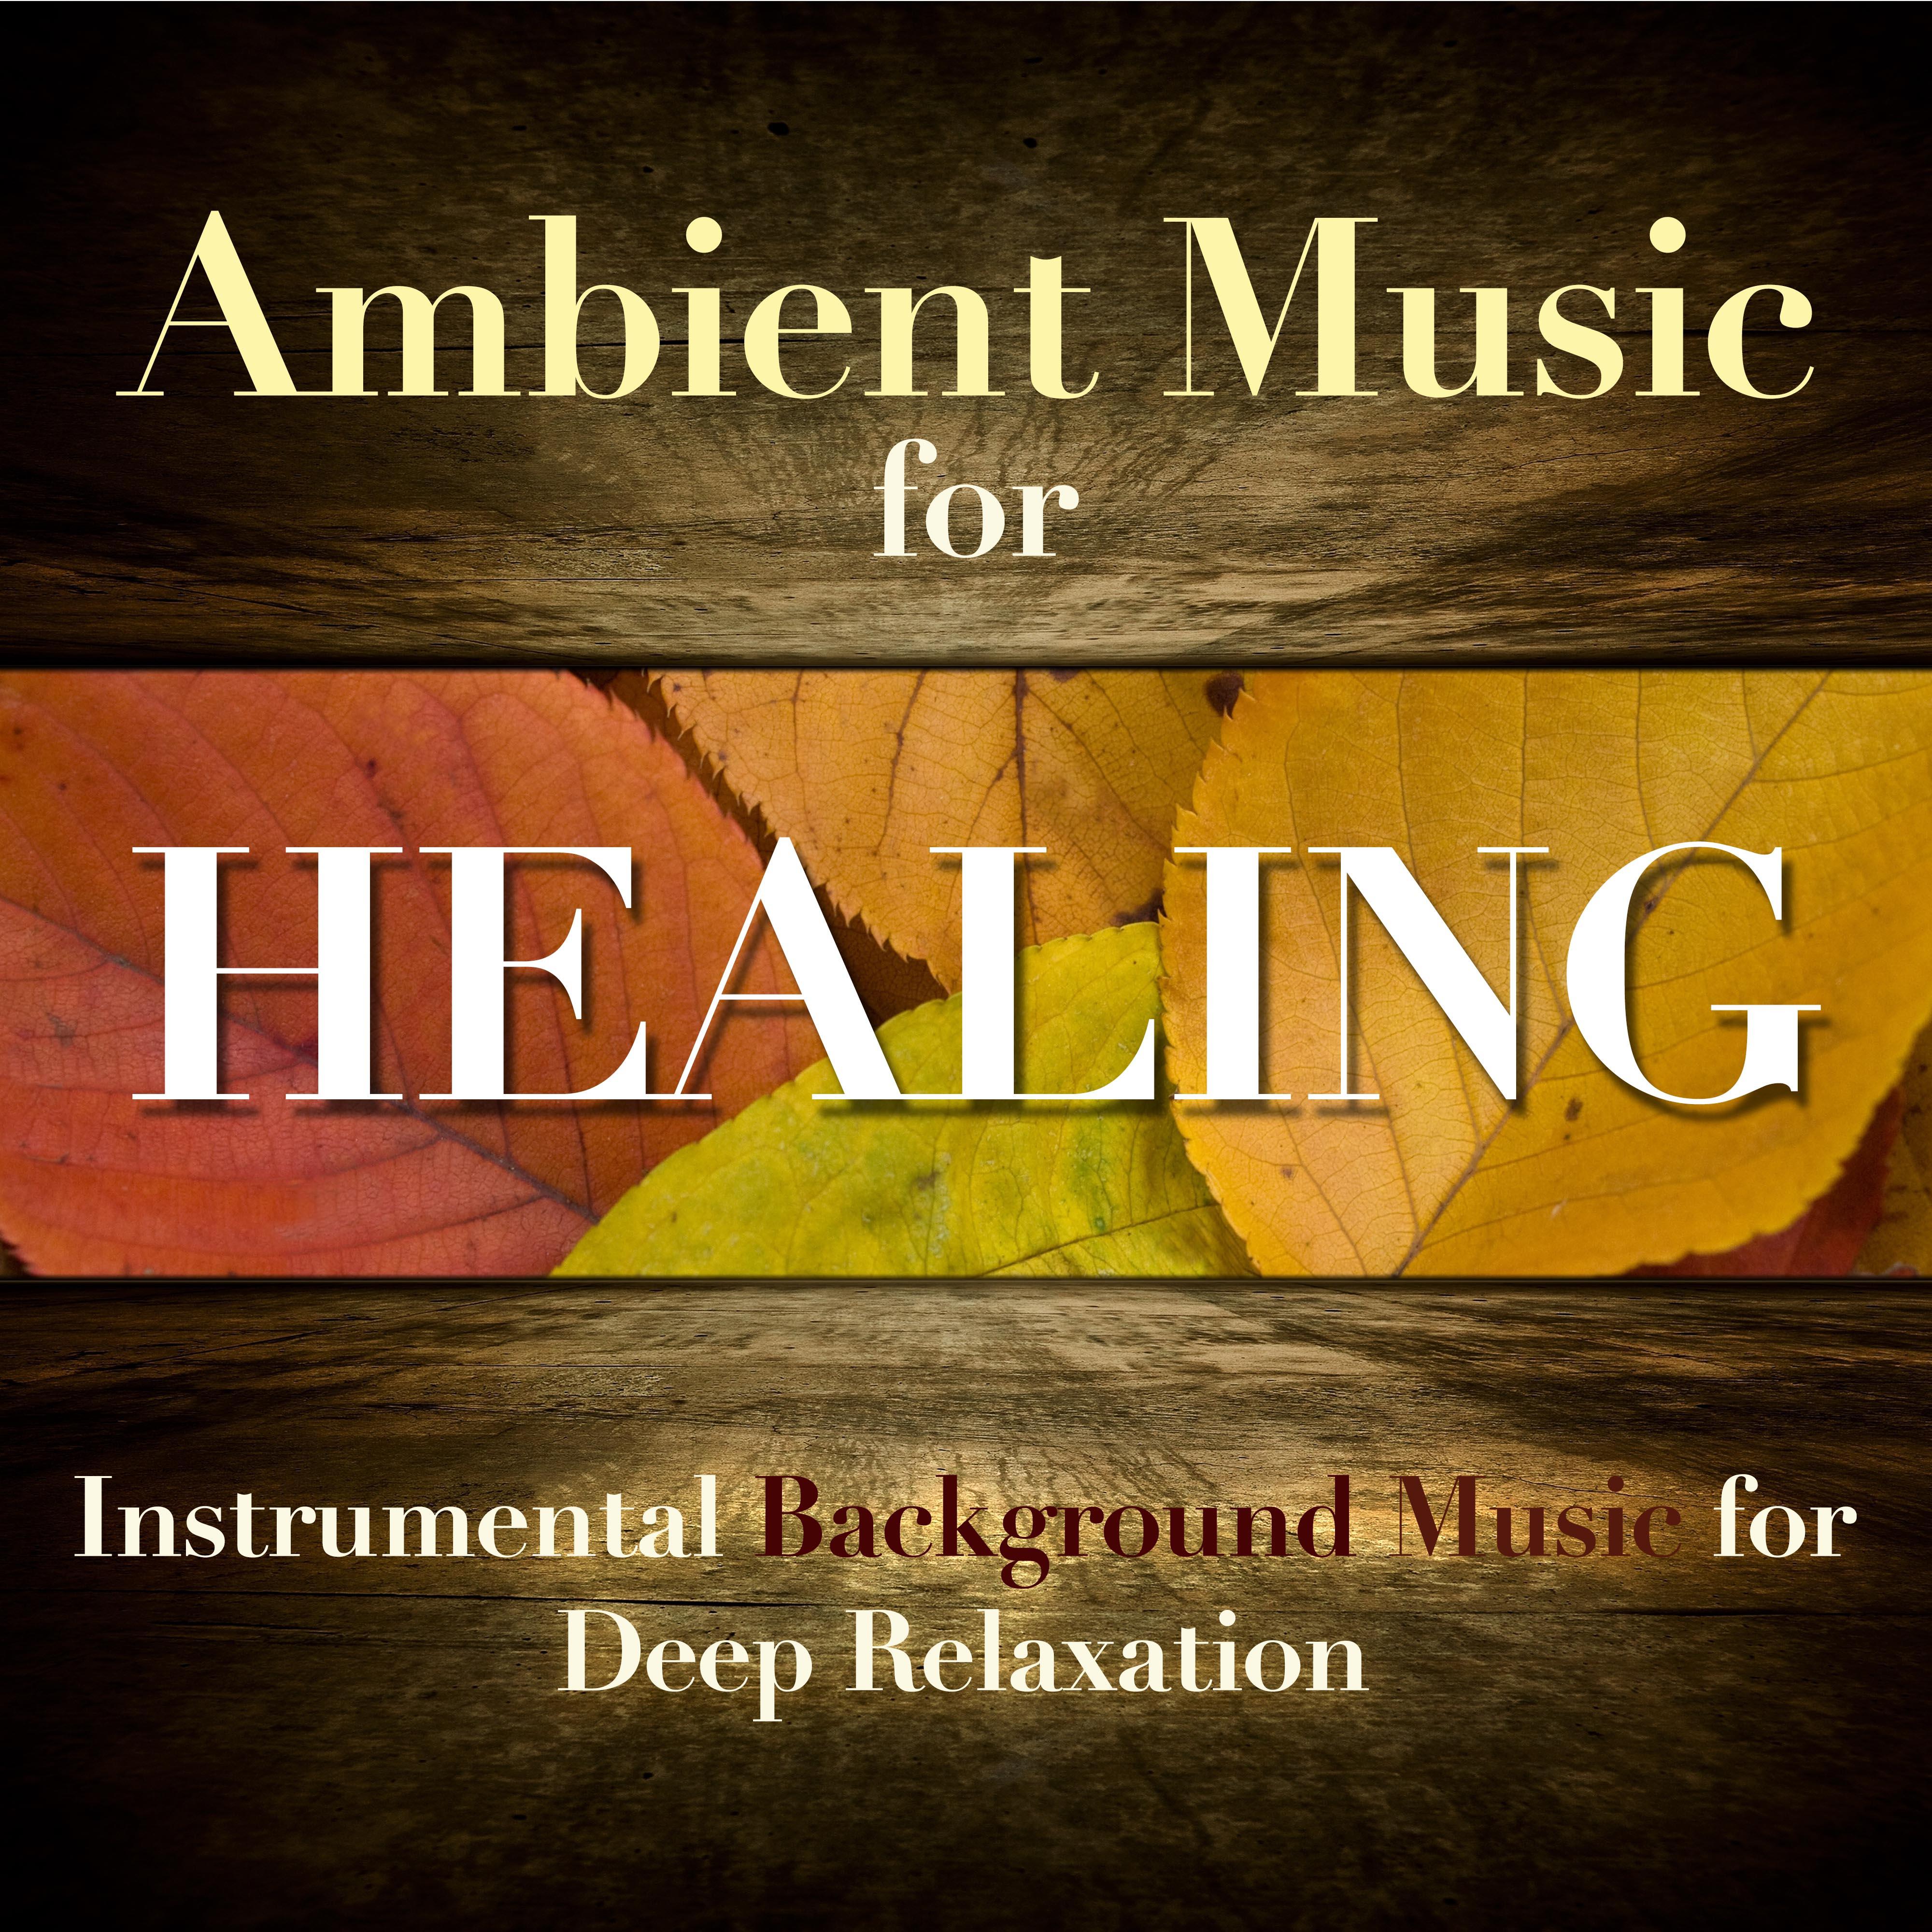 Ambient Music for Healing: Instrumental Background Music to Relax and Find Peace and Tranquil States of Mind